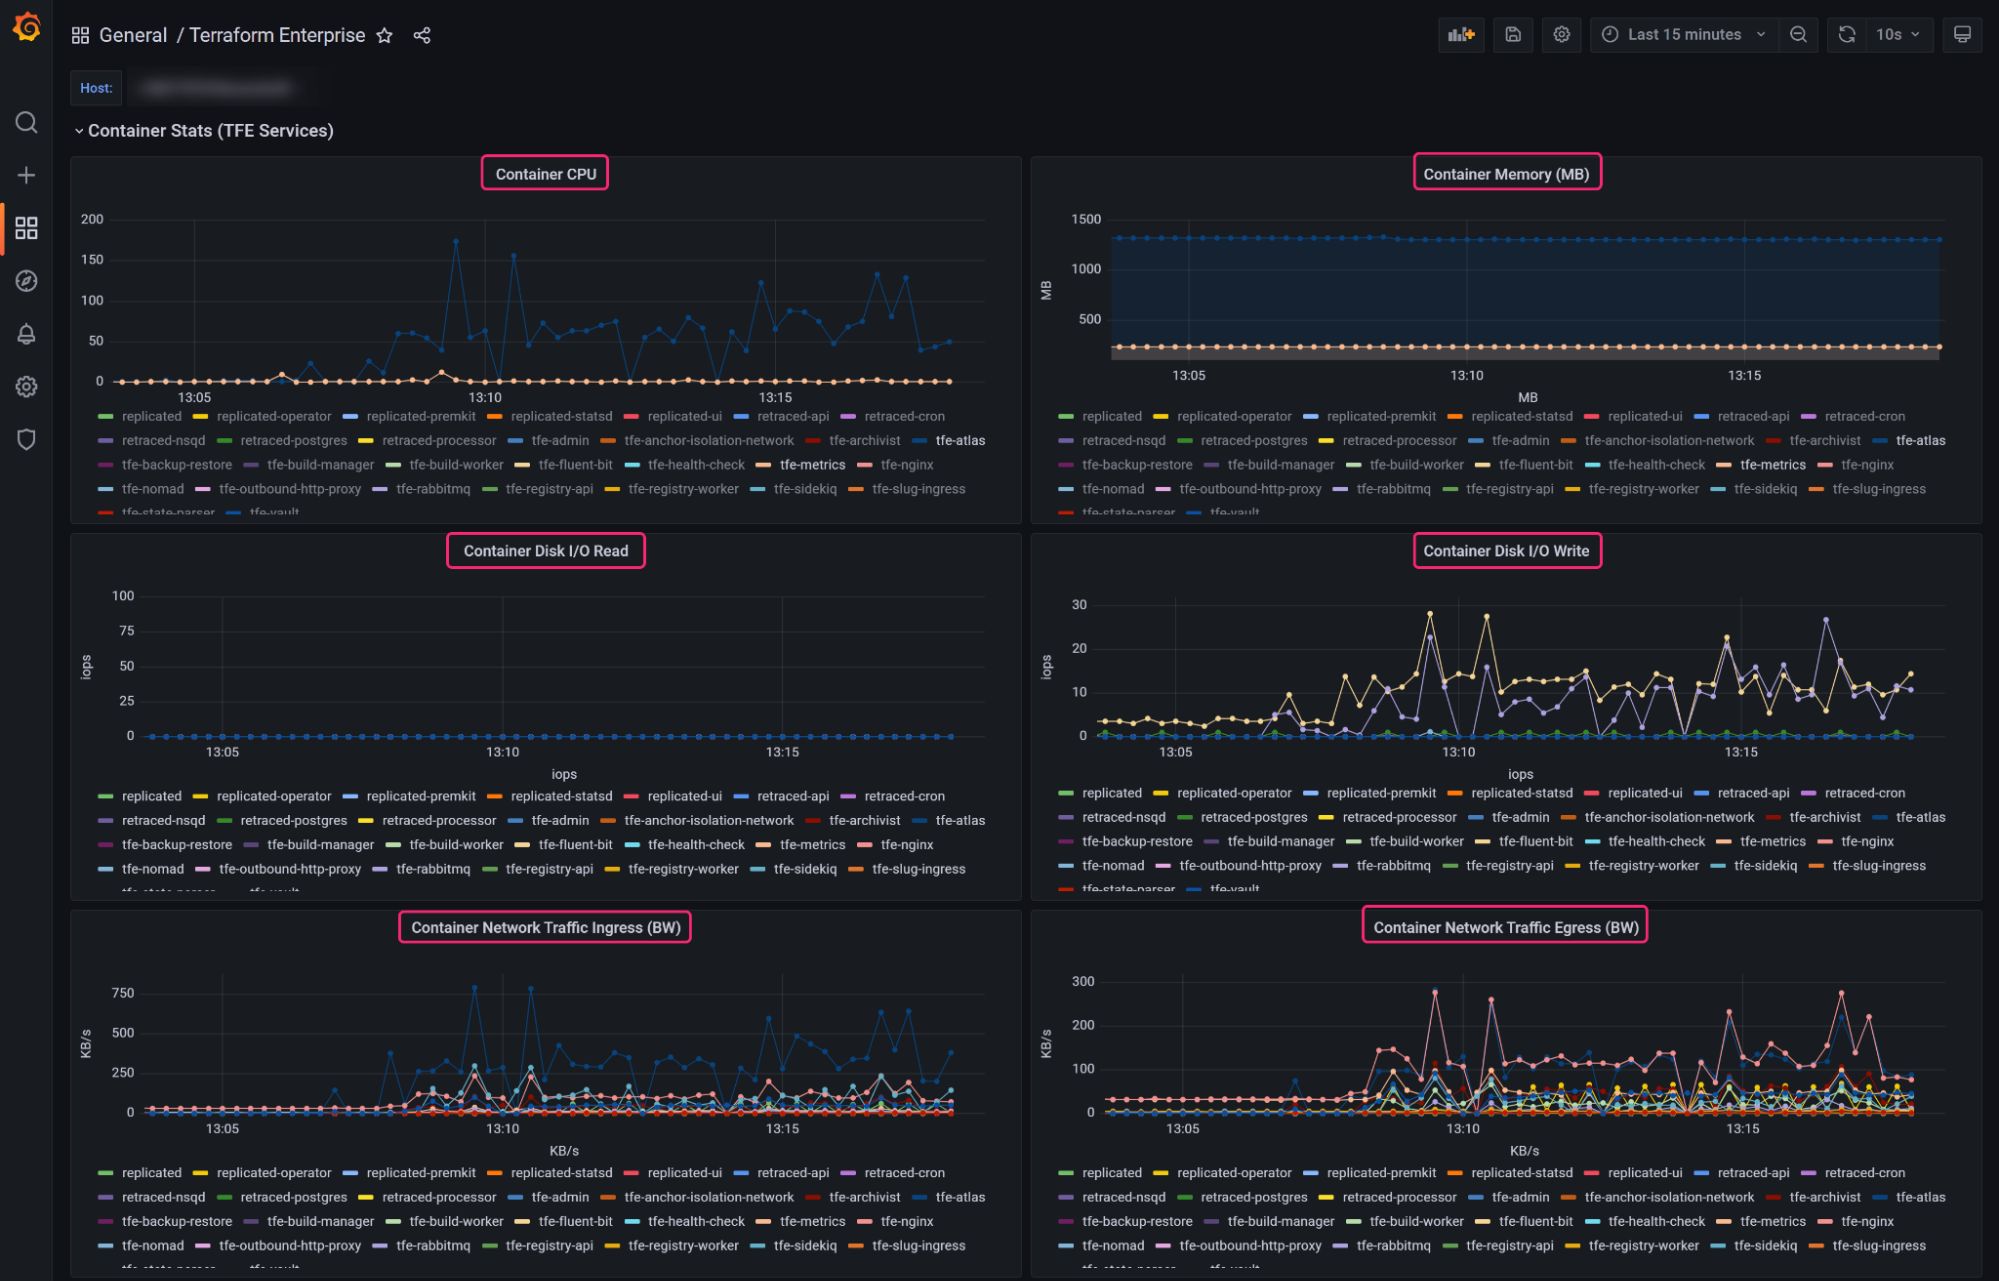 A section of the imported Grafana dashboard showing multiple line graphs, such as the container CPU usage, container memory usage, disk I/O read, disk I/O write and network traffic